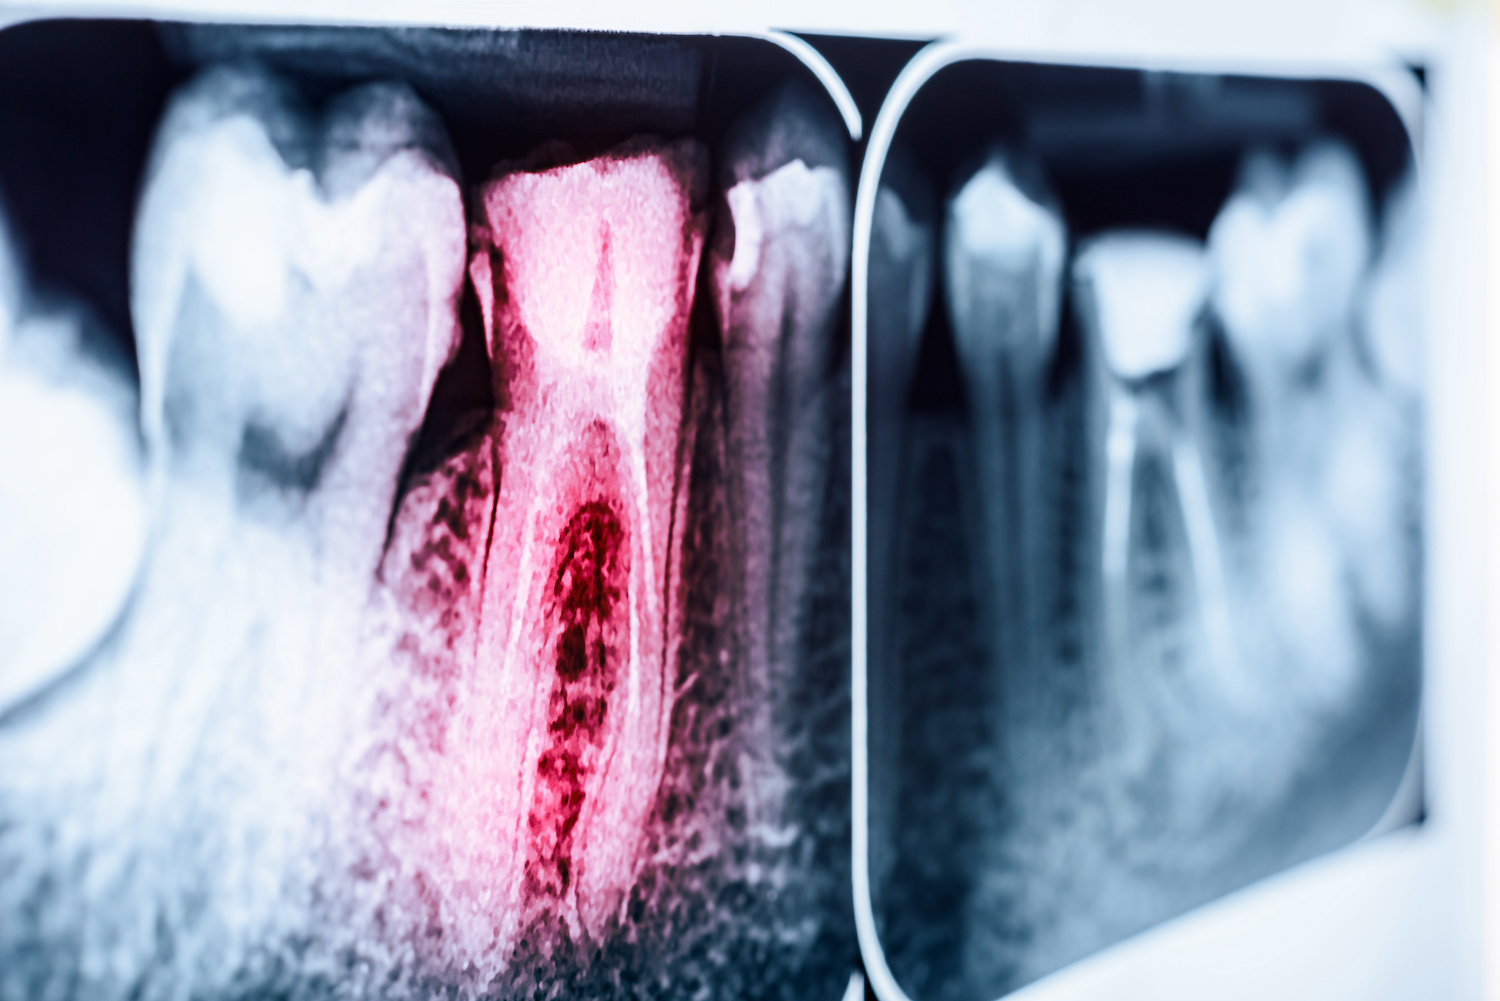 Root canal in an x-ray